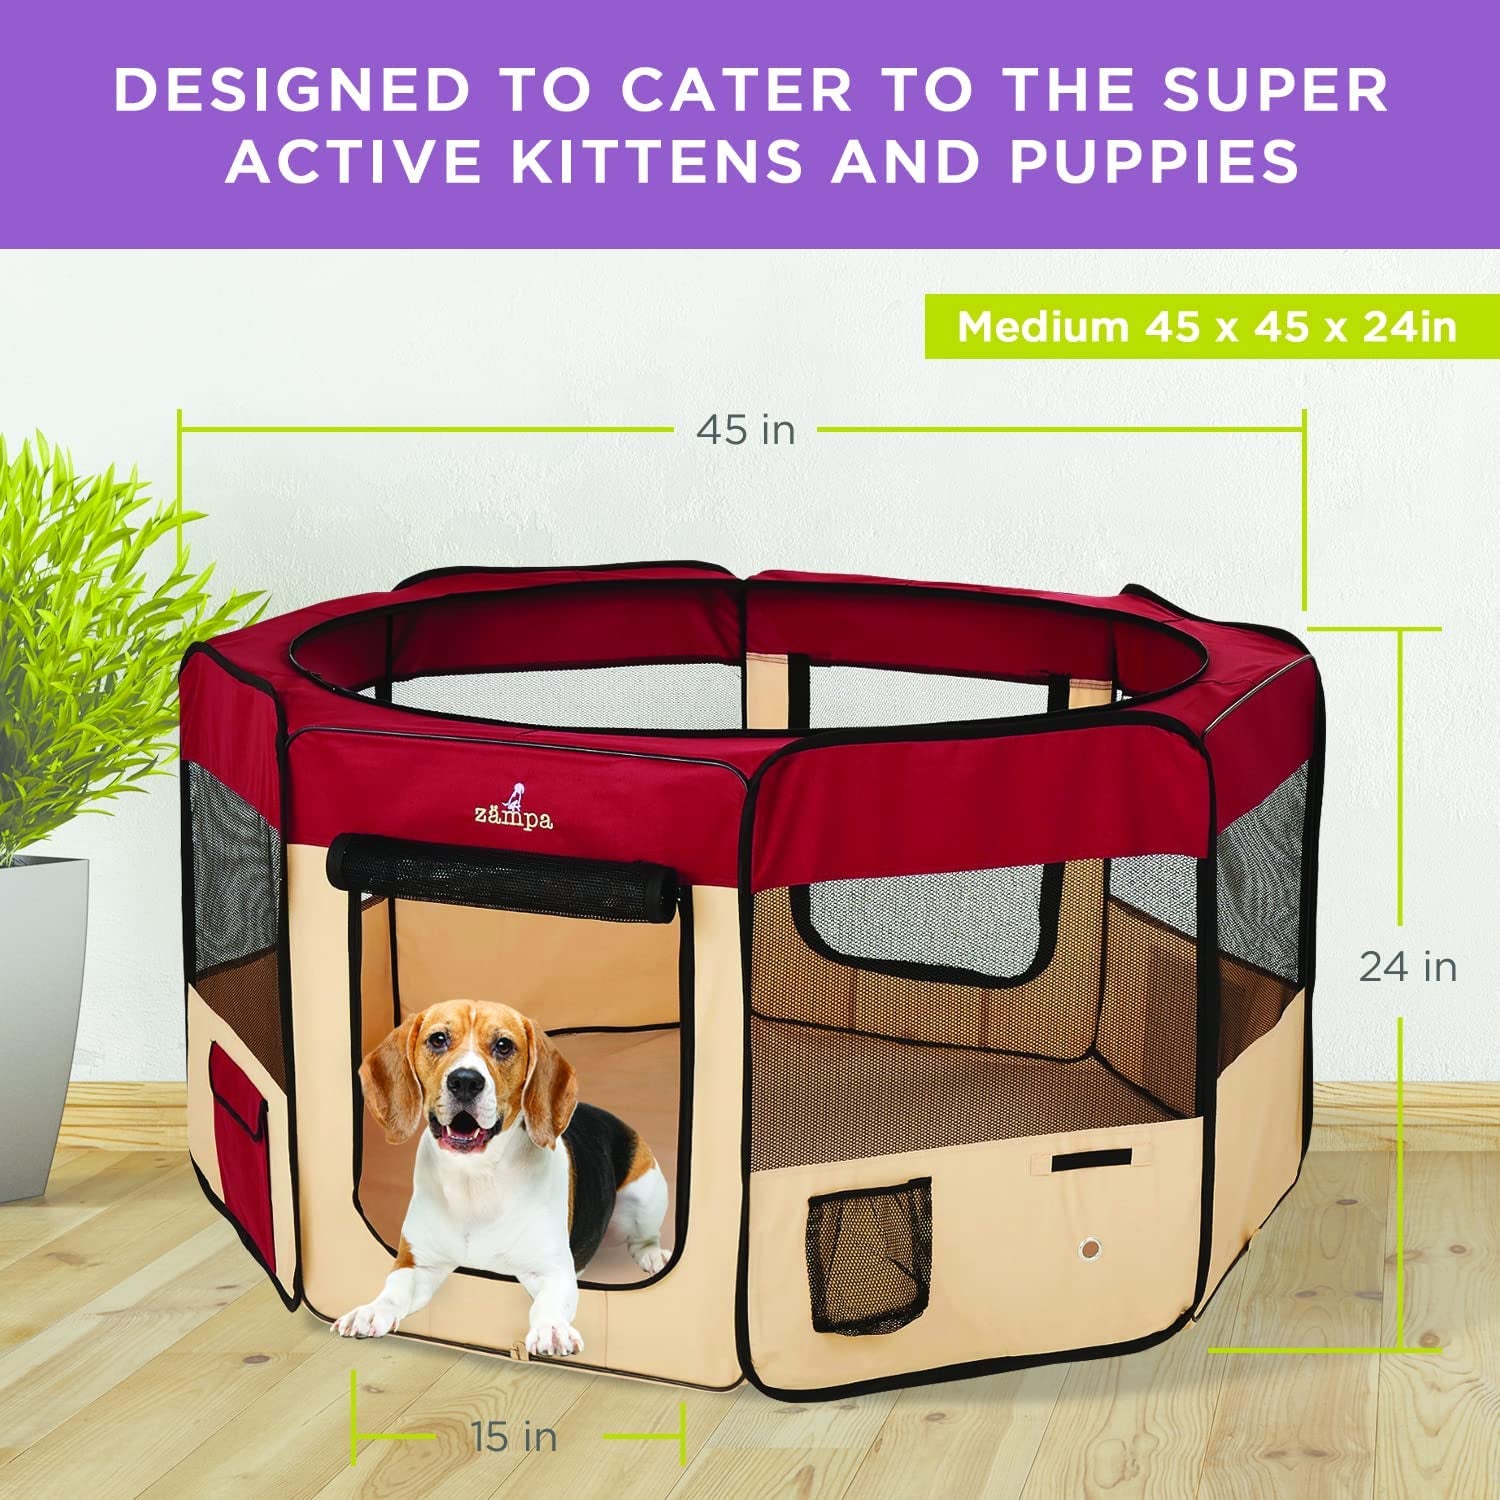 Pop up Portable Medium 45"X45"X24" Playpen for Dog and Cat, Foldable | Indoor/Outdoor Pen & Travel Pet Carrier + Carrying Case